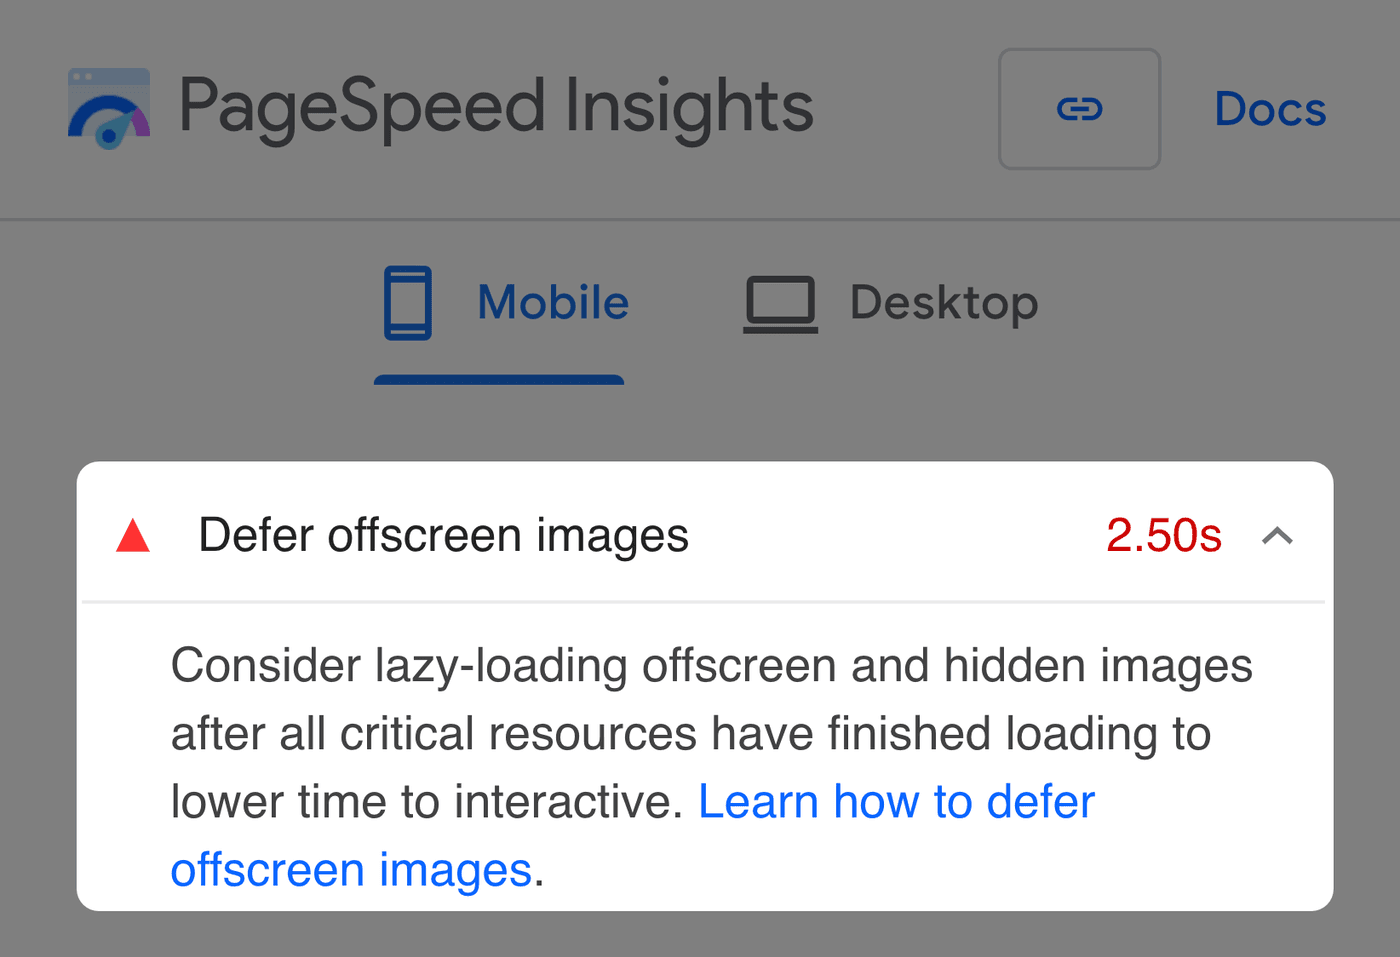 Lighthouse report that shows a failed 'defer offscreen images' audit.